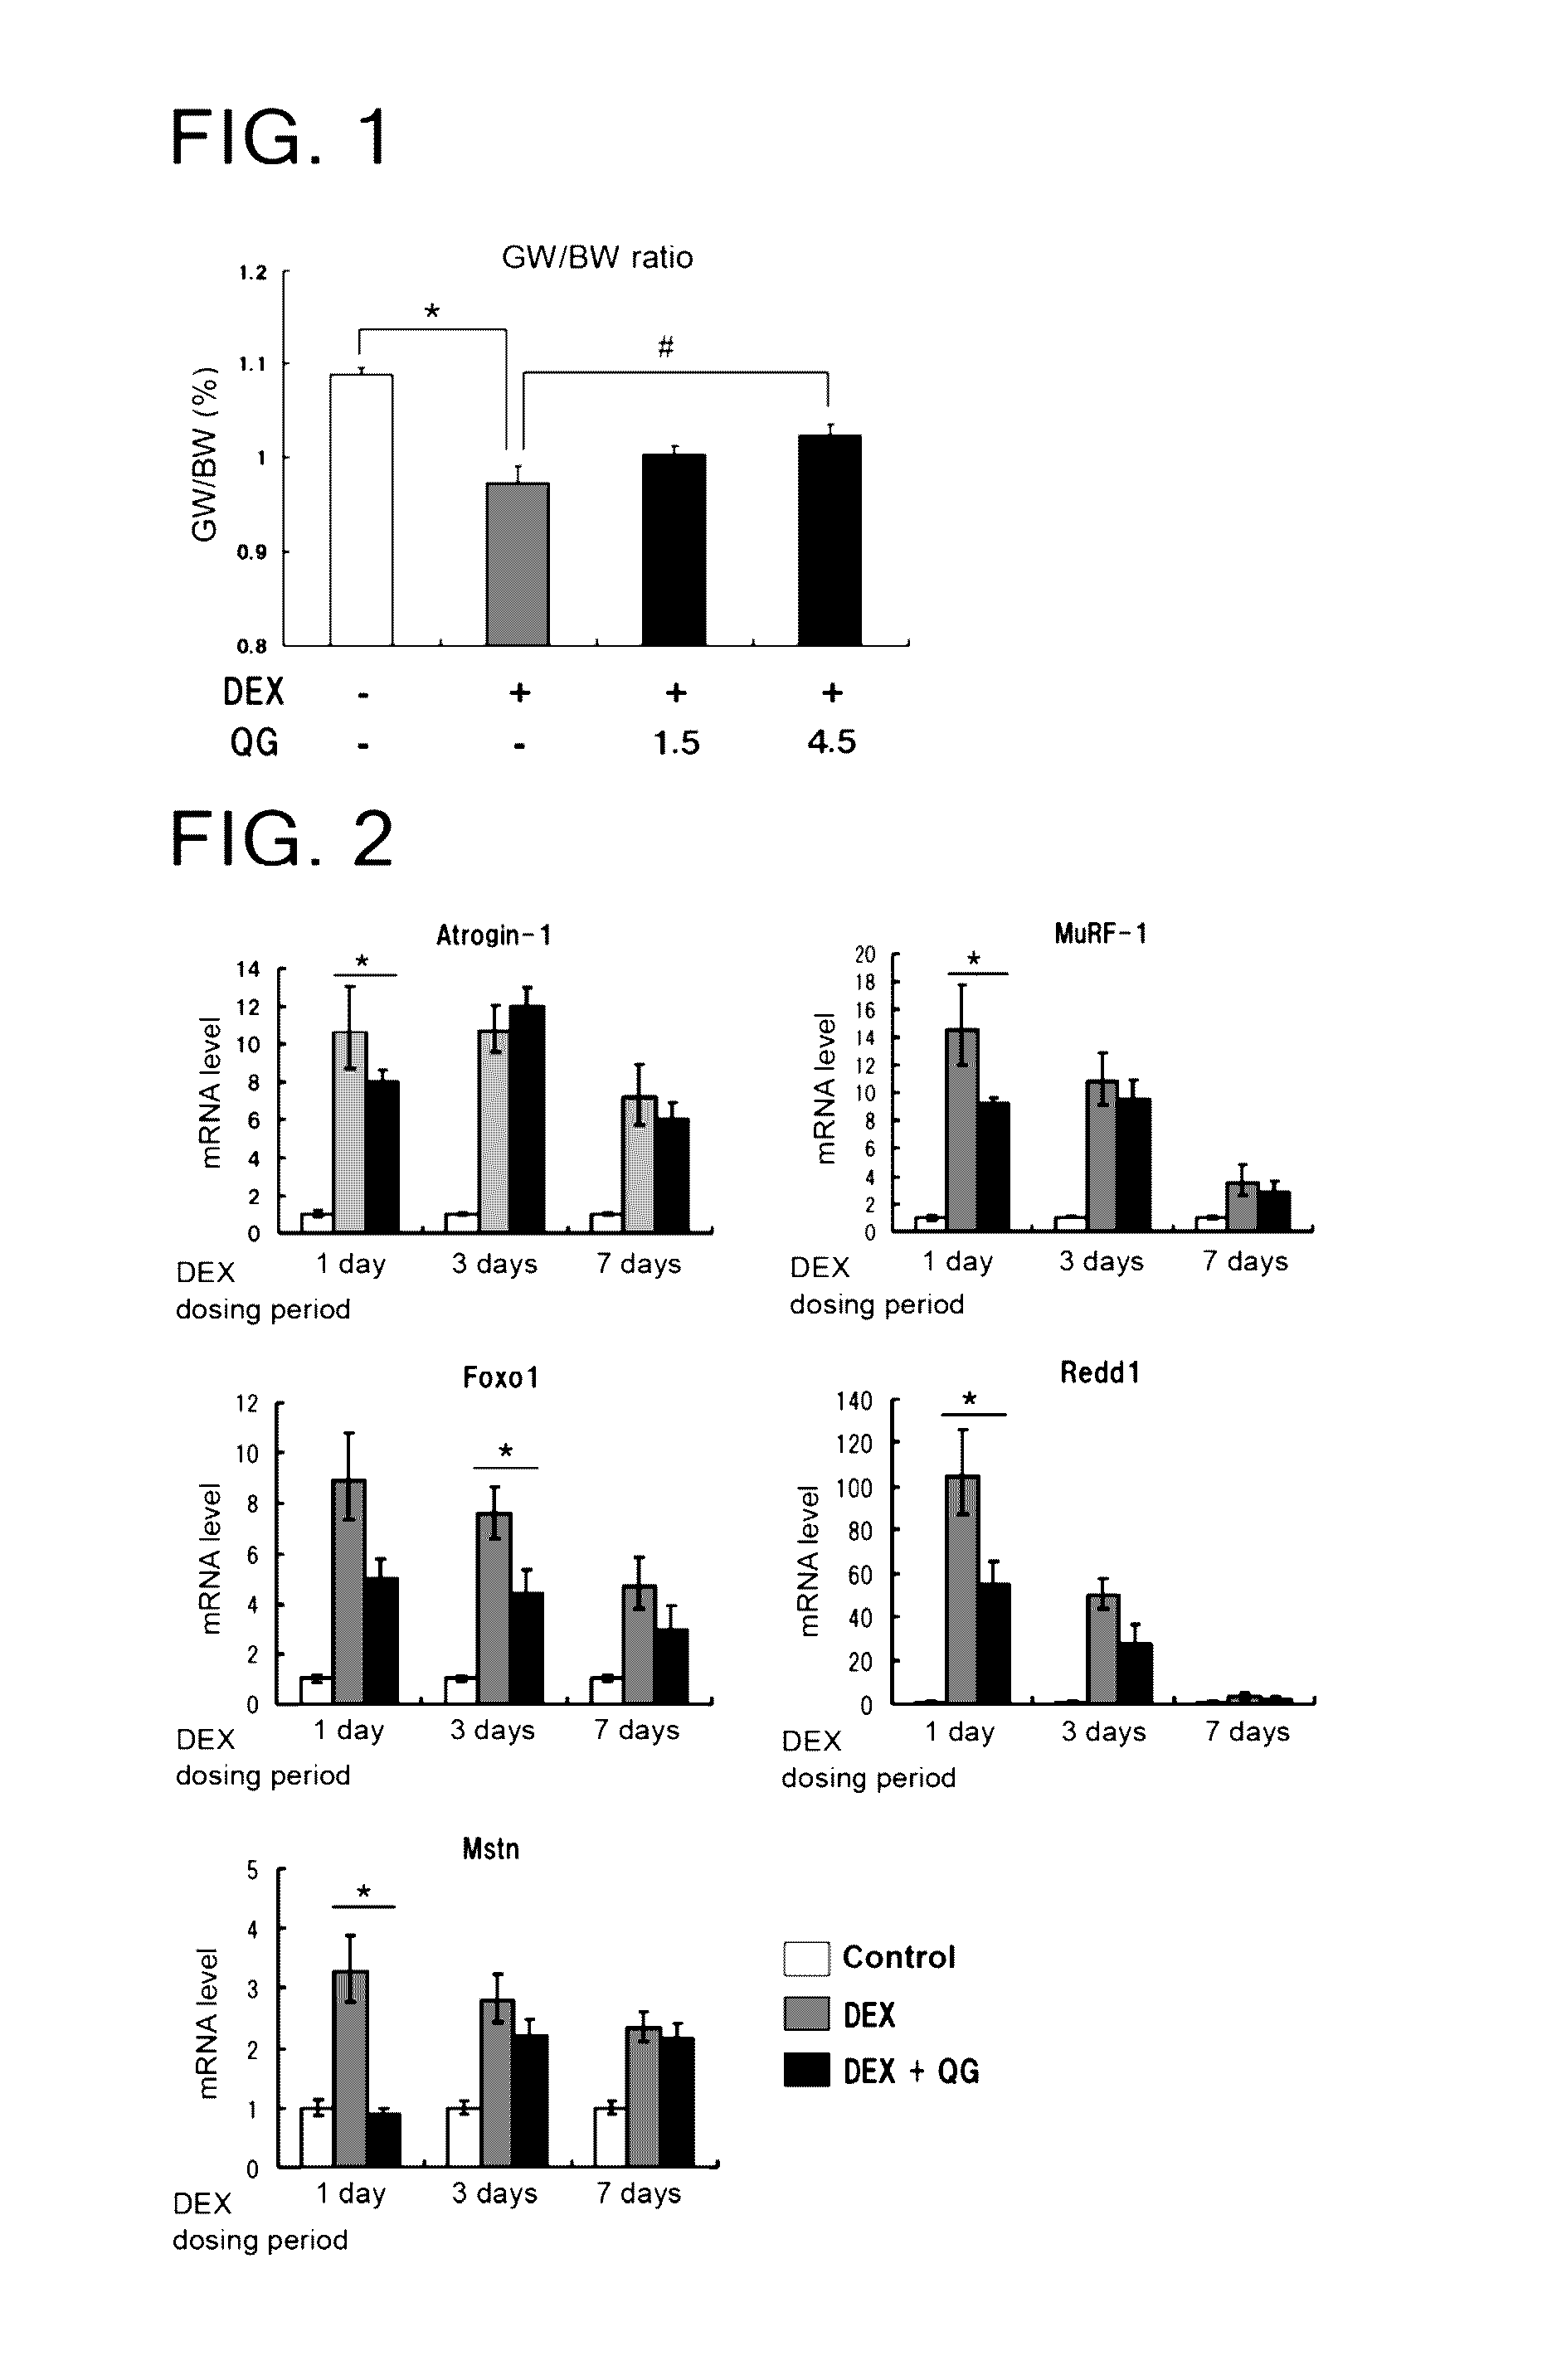 Muscle atrophy inhibitor containing quercetin glycoside